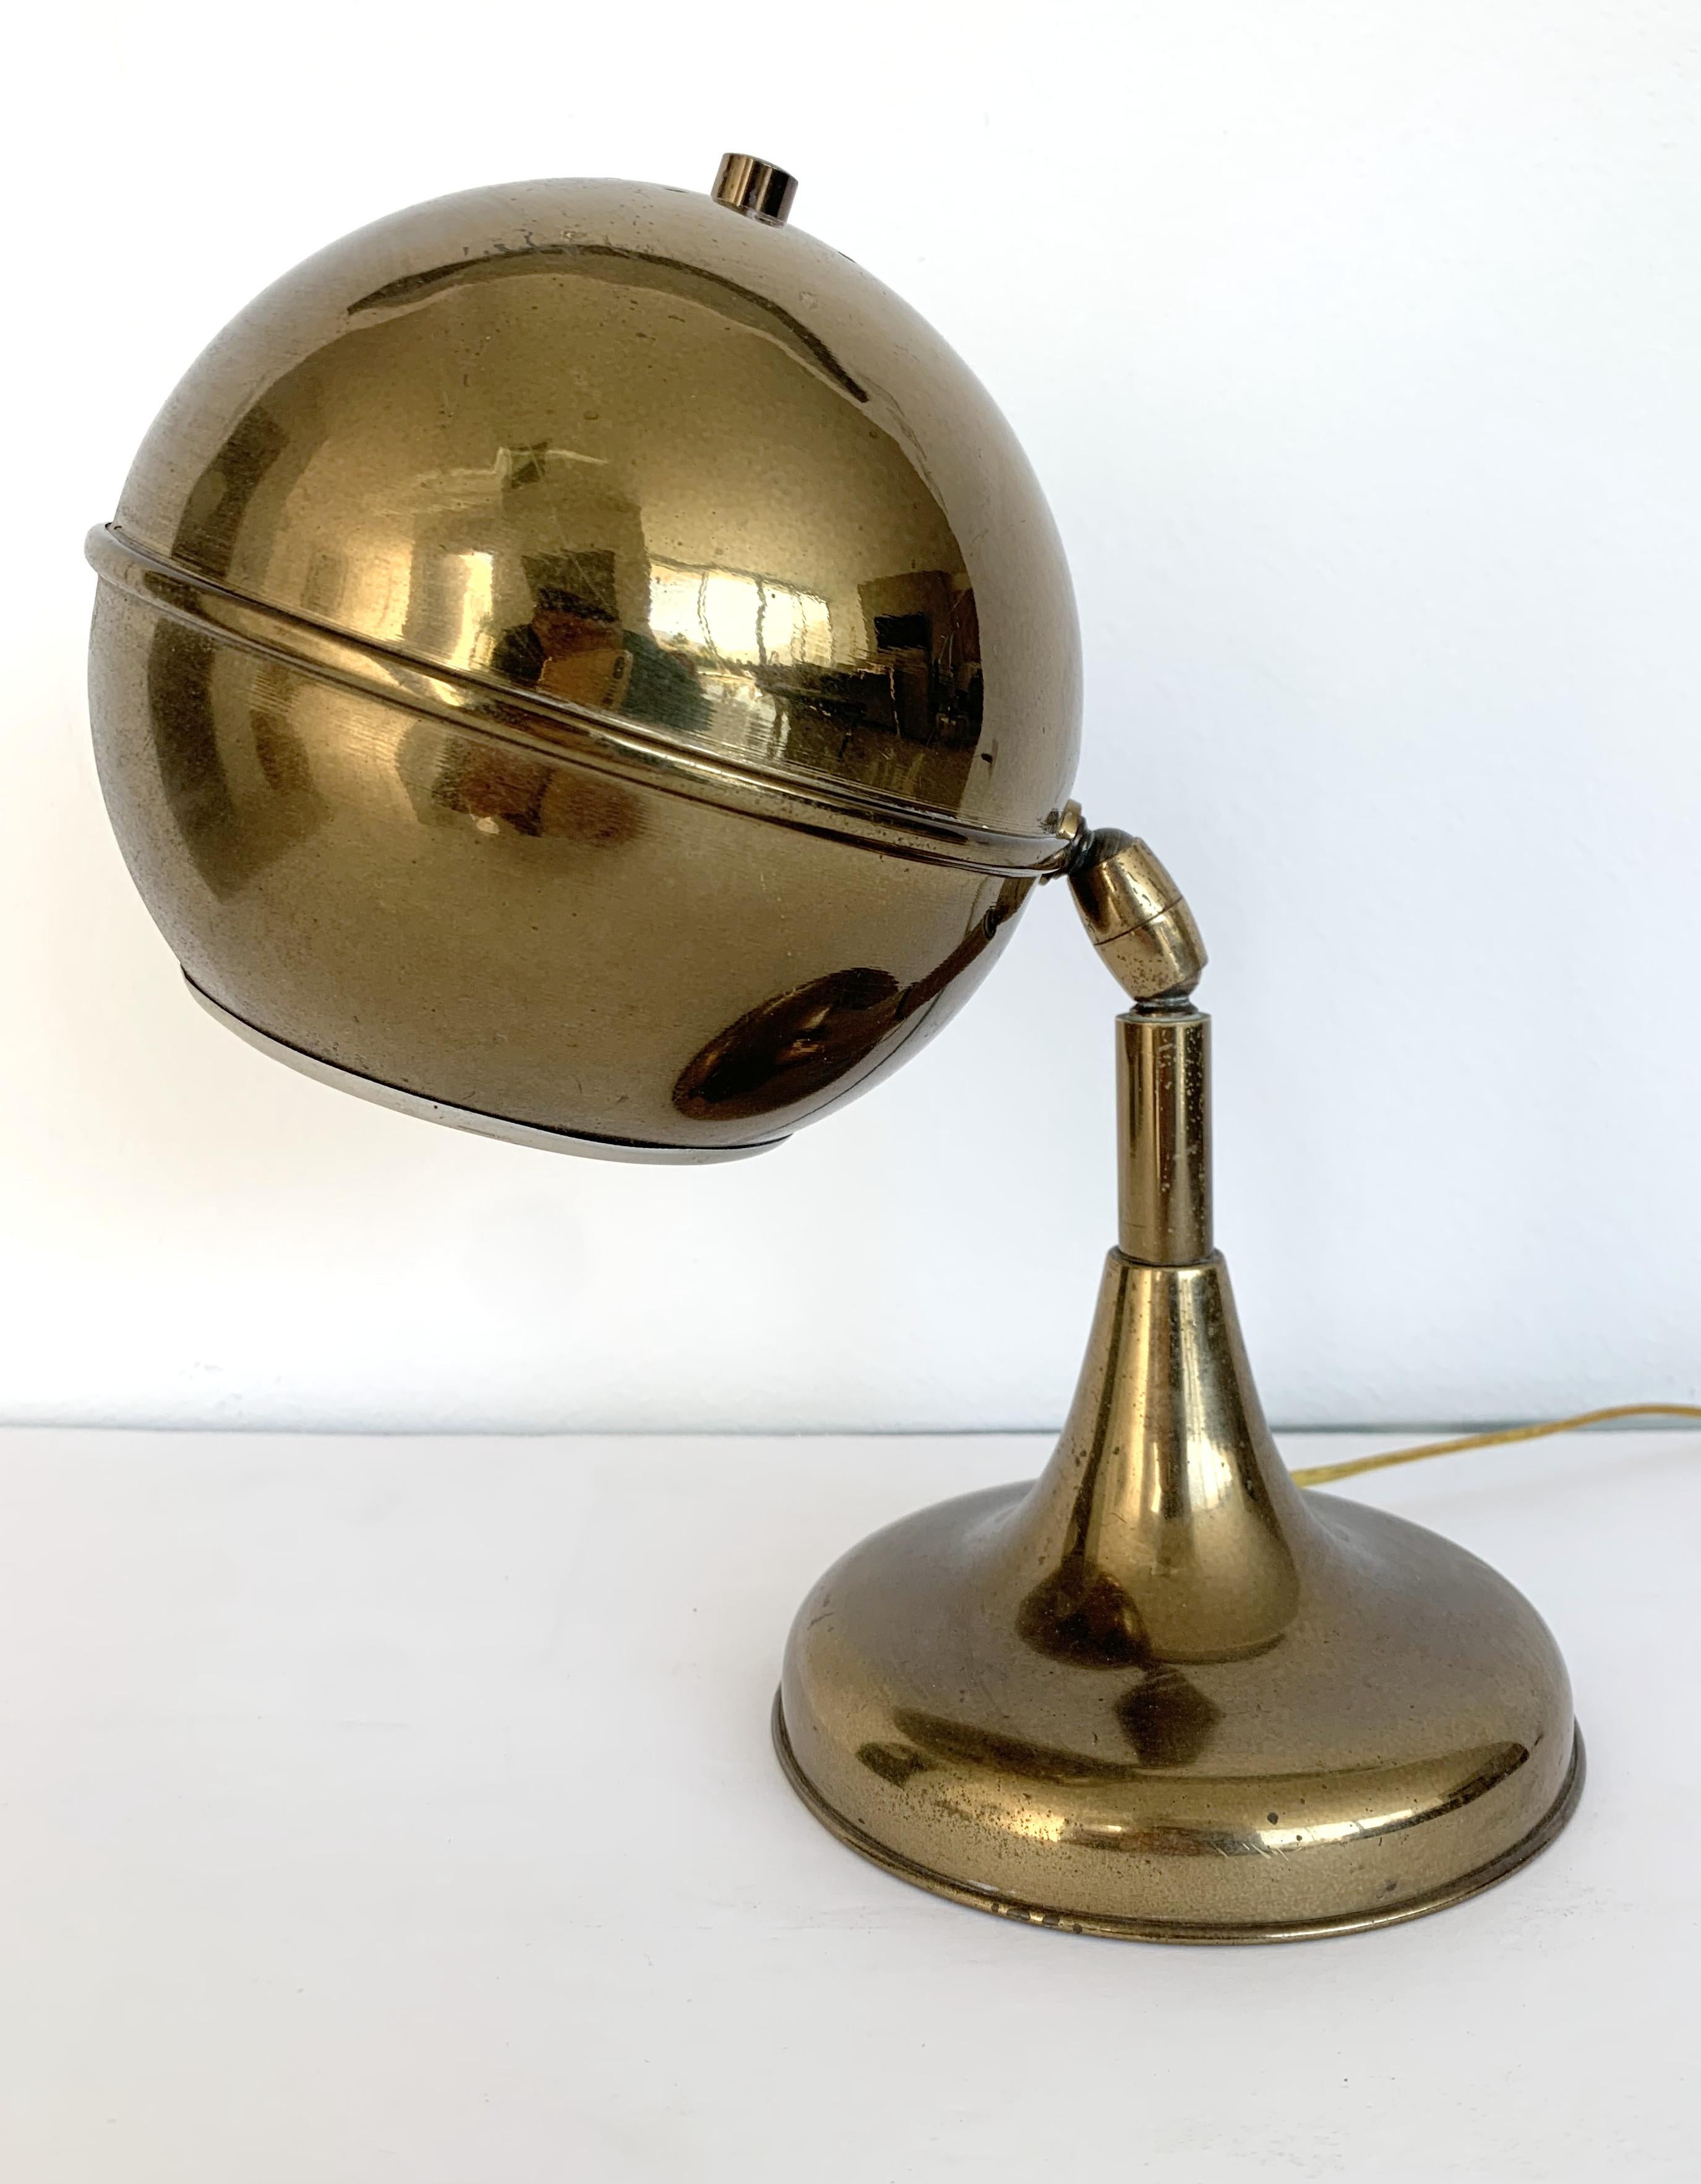 Vintage Italian desk lamp in brass body with adjustable neck, made in Italy, circa 1960s
1 light / E12 or E14 type / max 40W
Measures: height 12 inches, diameter 6 inches
1 in stock in Palm Springs currently ON HOLIDAY SALE for $719 !!
Order